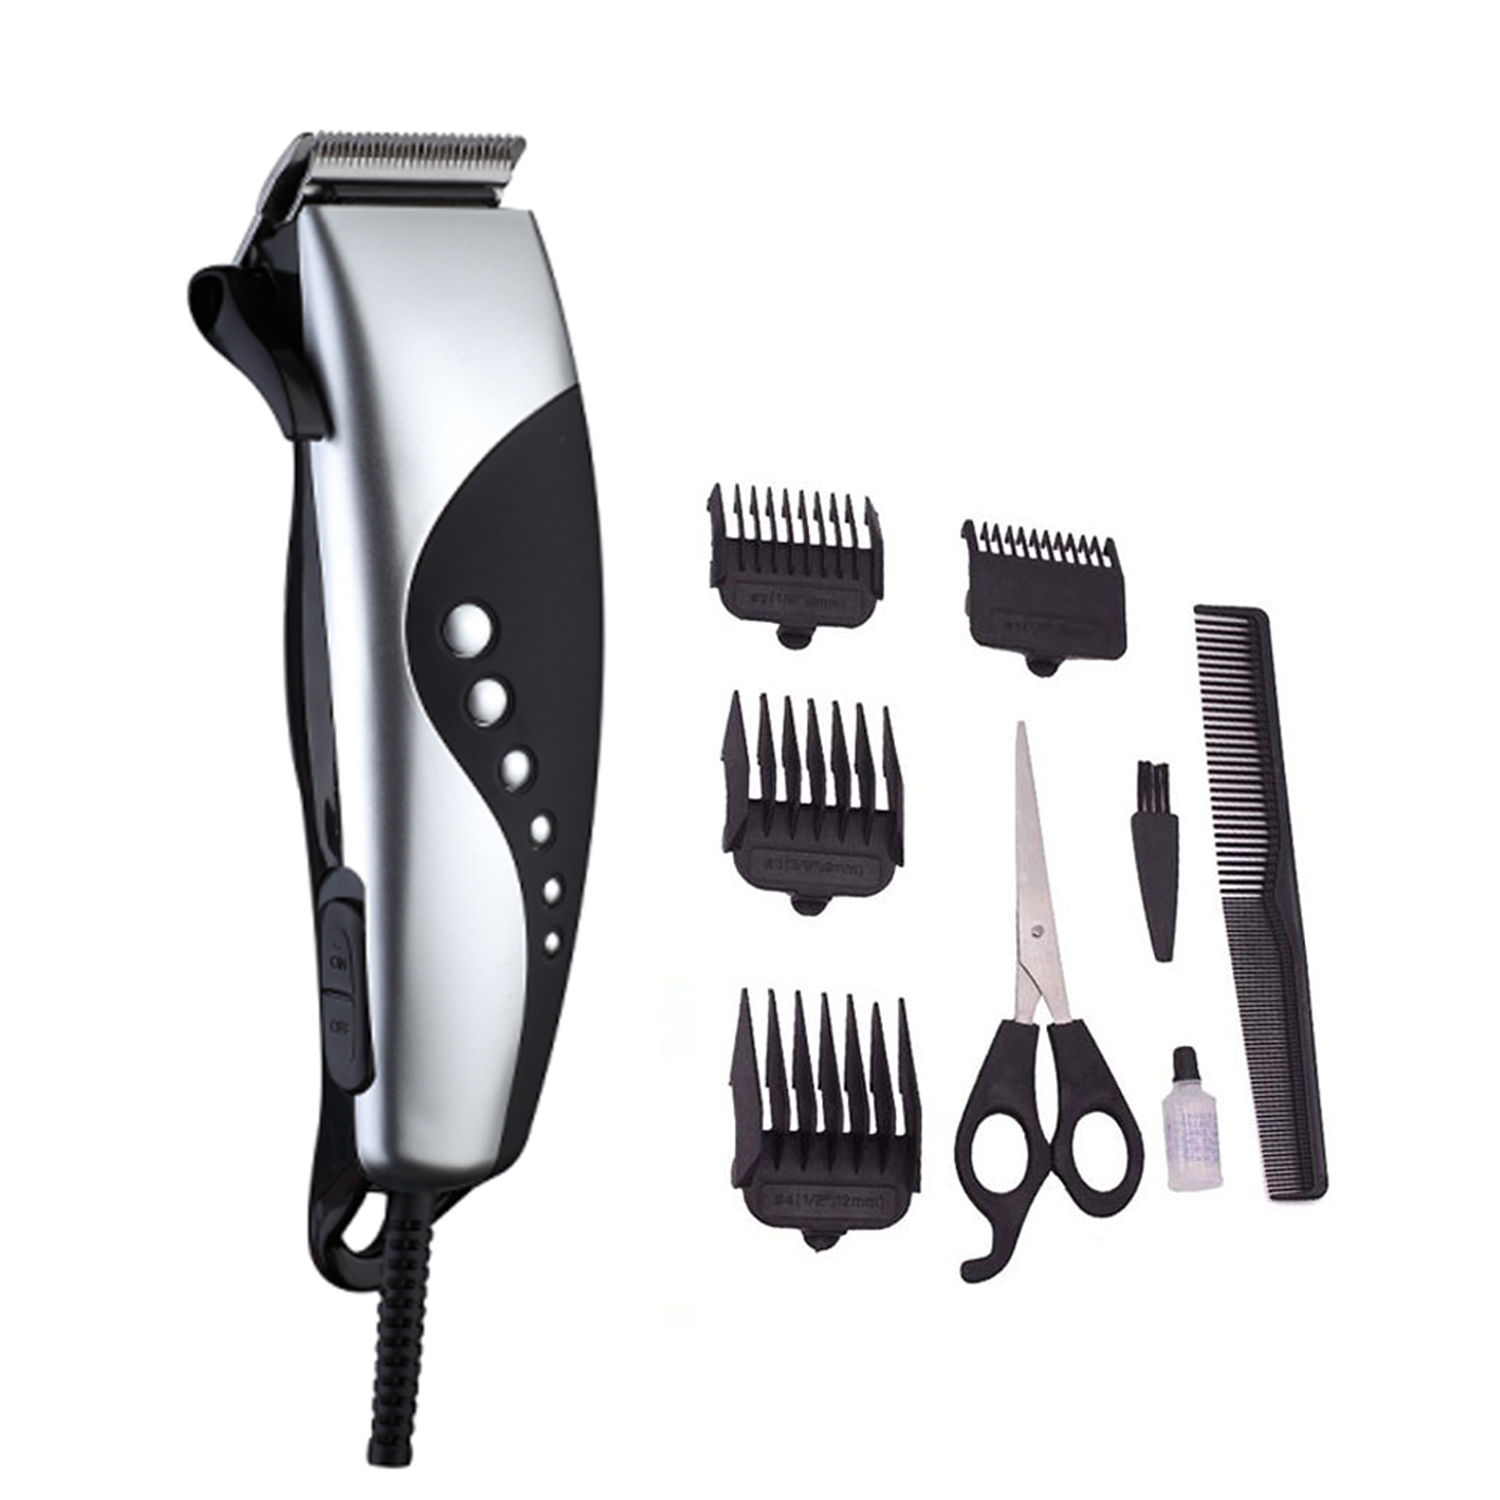 Household Electric Hair Clippers Adjustable Head Portable Hair Clippers with Cord